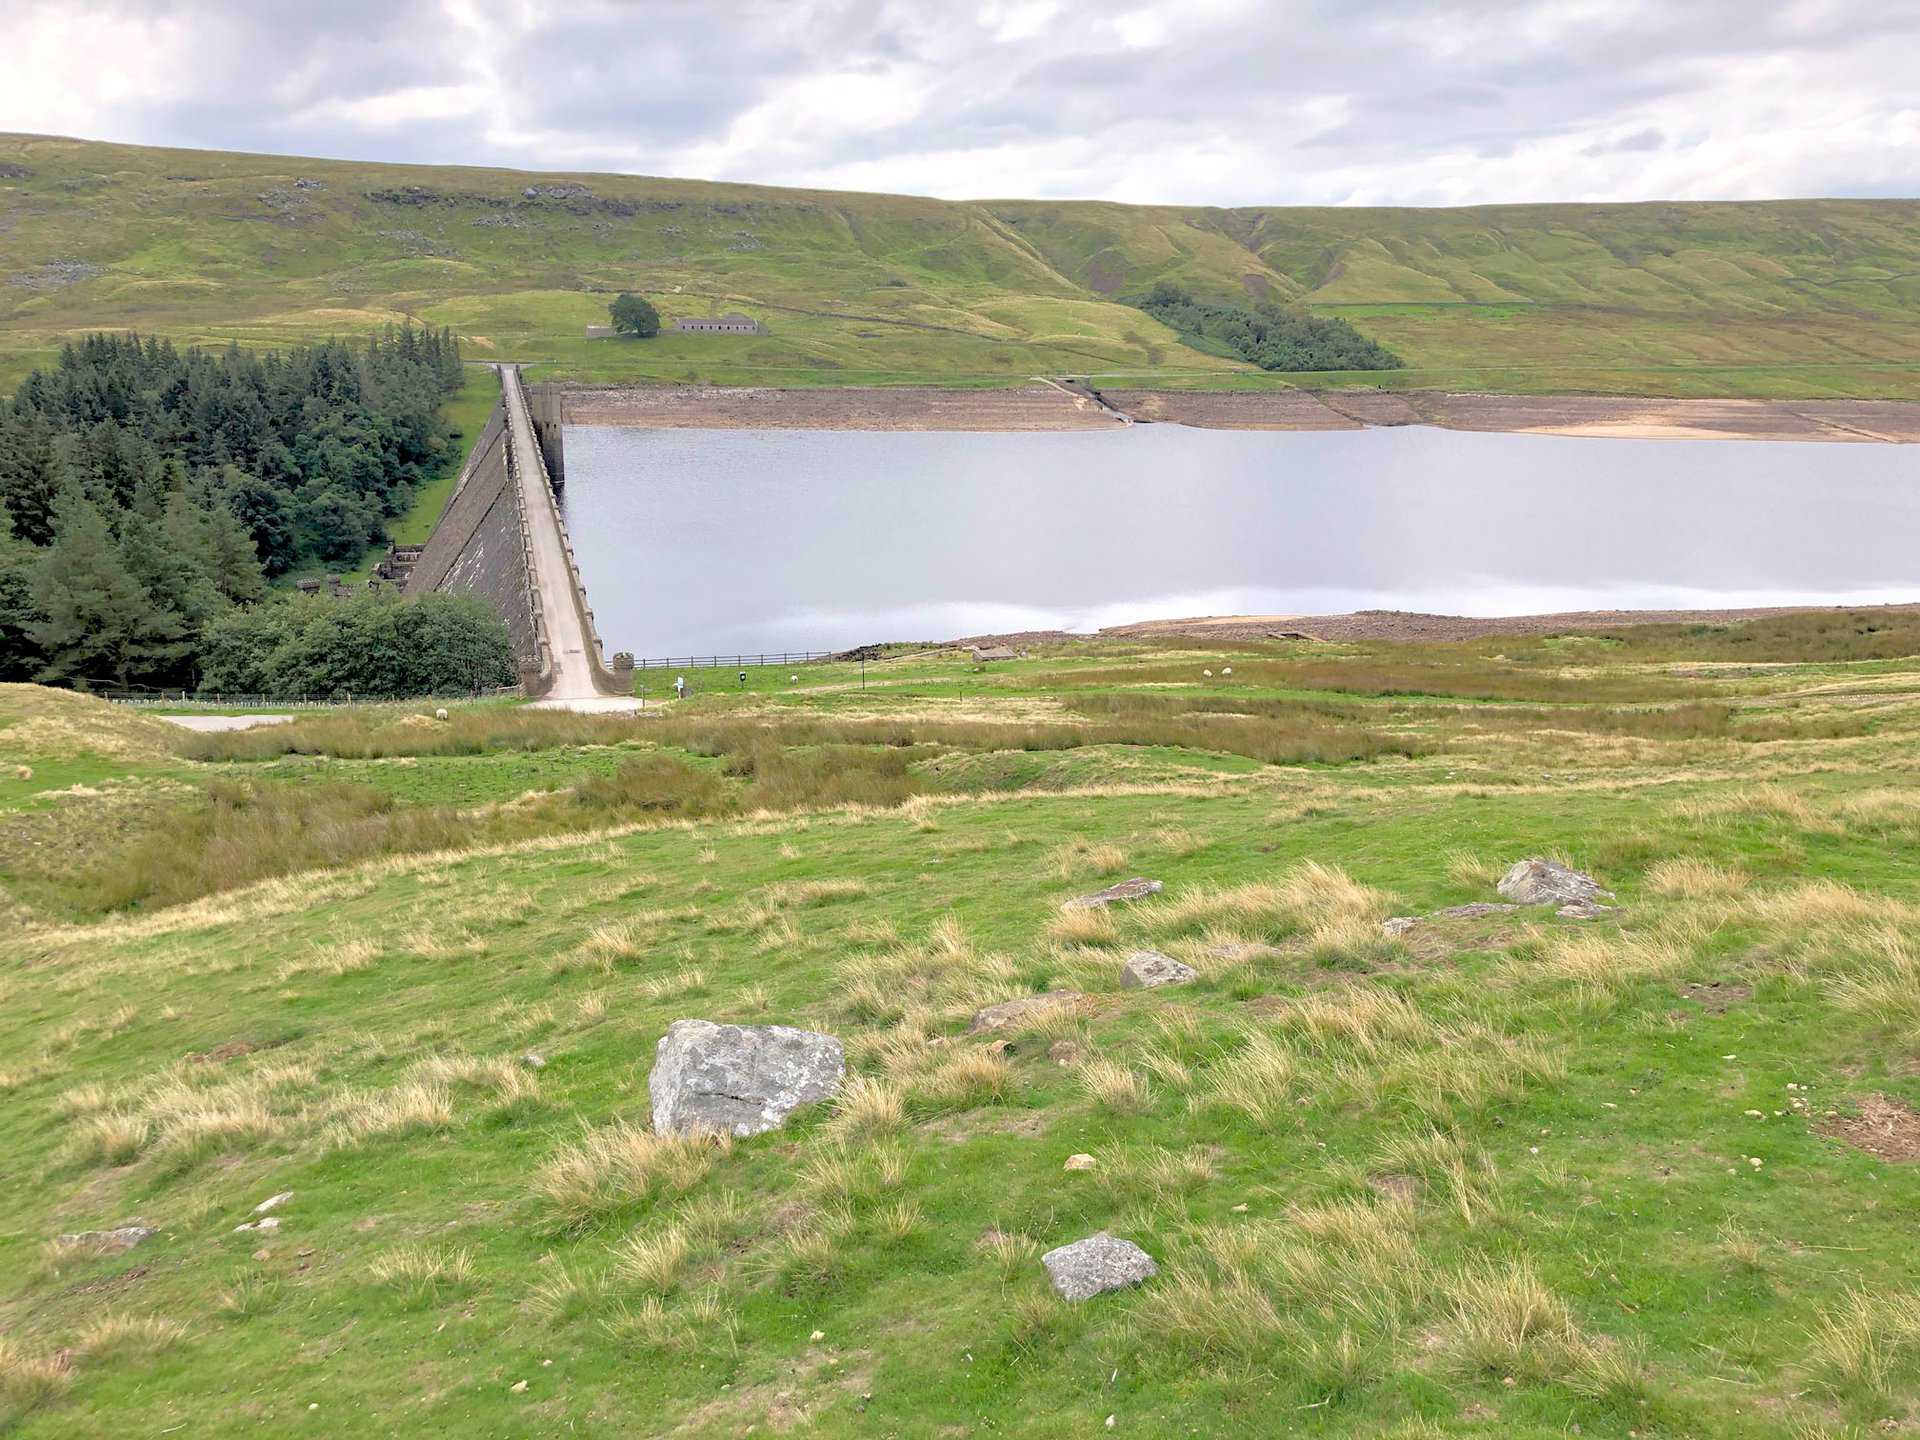 Scar House was the last reservoir to be built in the Nidd Valley and took fifteen years to complete. Stone for the dam was quarried from Carle Fell Side, to the north-west of the dam. Scar House was once home to more than 1250 villagers who built the Nidderdale dam, and evidence of the village can be seen in the form of concrete bases on the approach road to the reservoir.